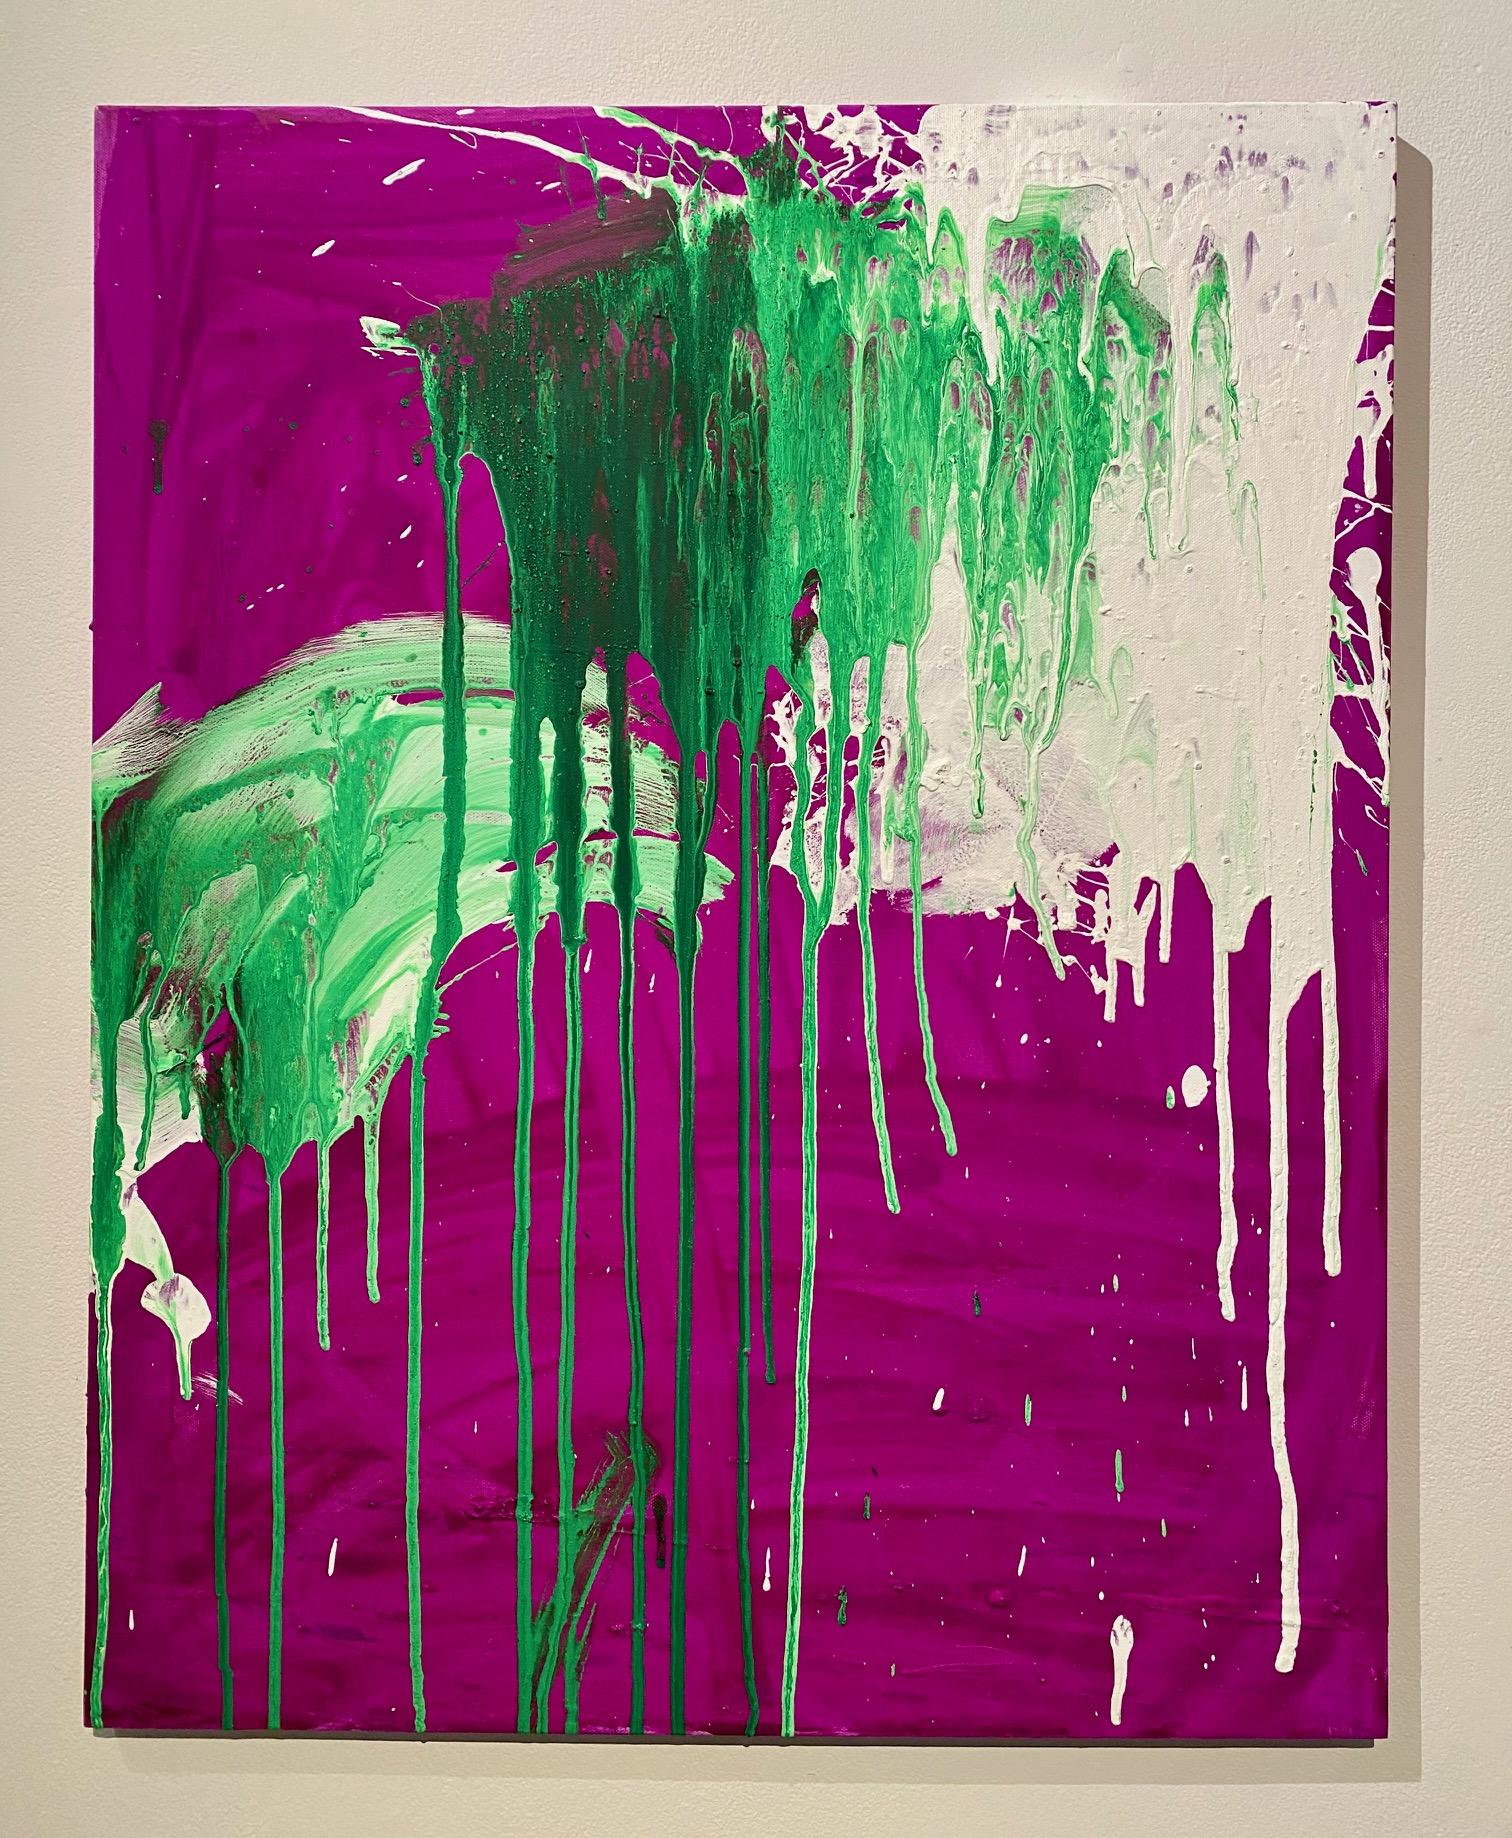 Ushio Shinohara Abstract Painting - "White and Green on Violet (B), " Acrylic Painting on Canvas - Boxing painting